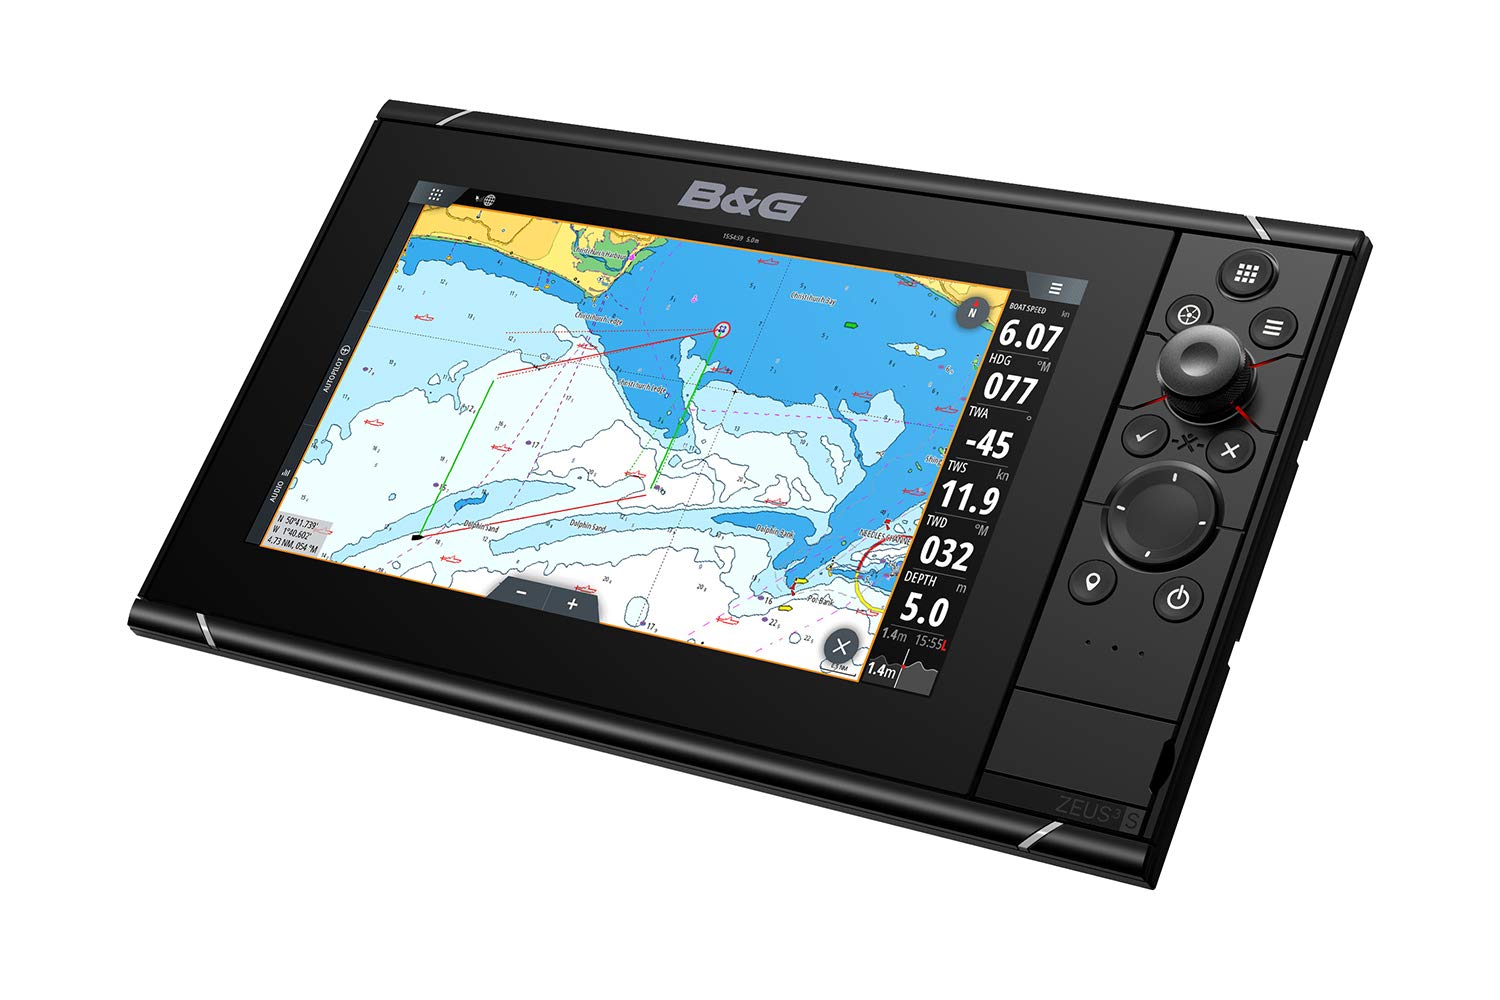 B&G Zeus3S 9-9-inch Sailing Chartplotter with C-MAP US Cartography